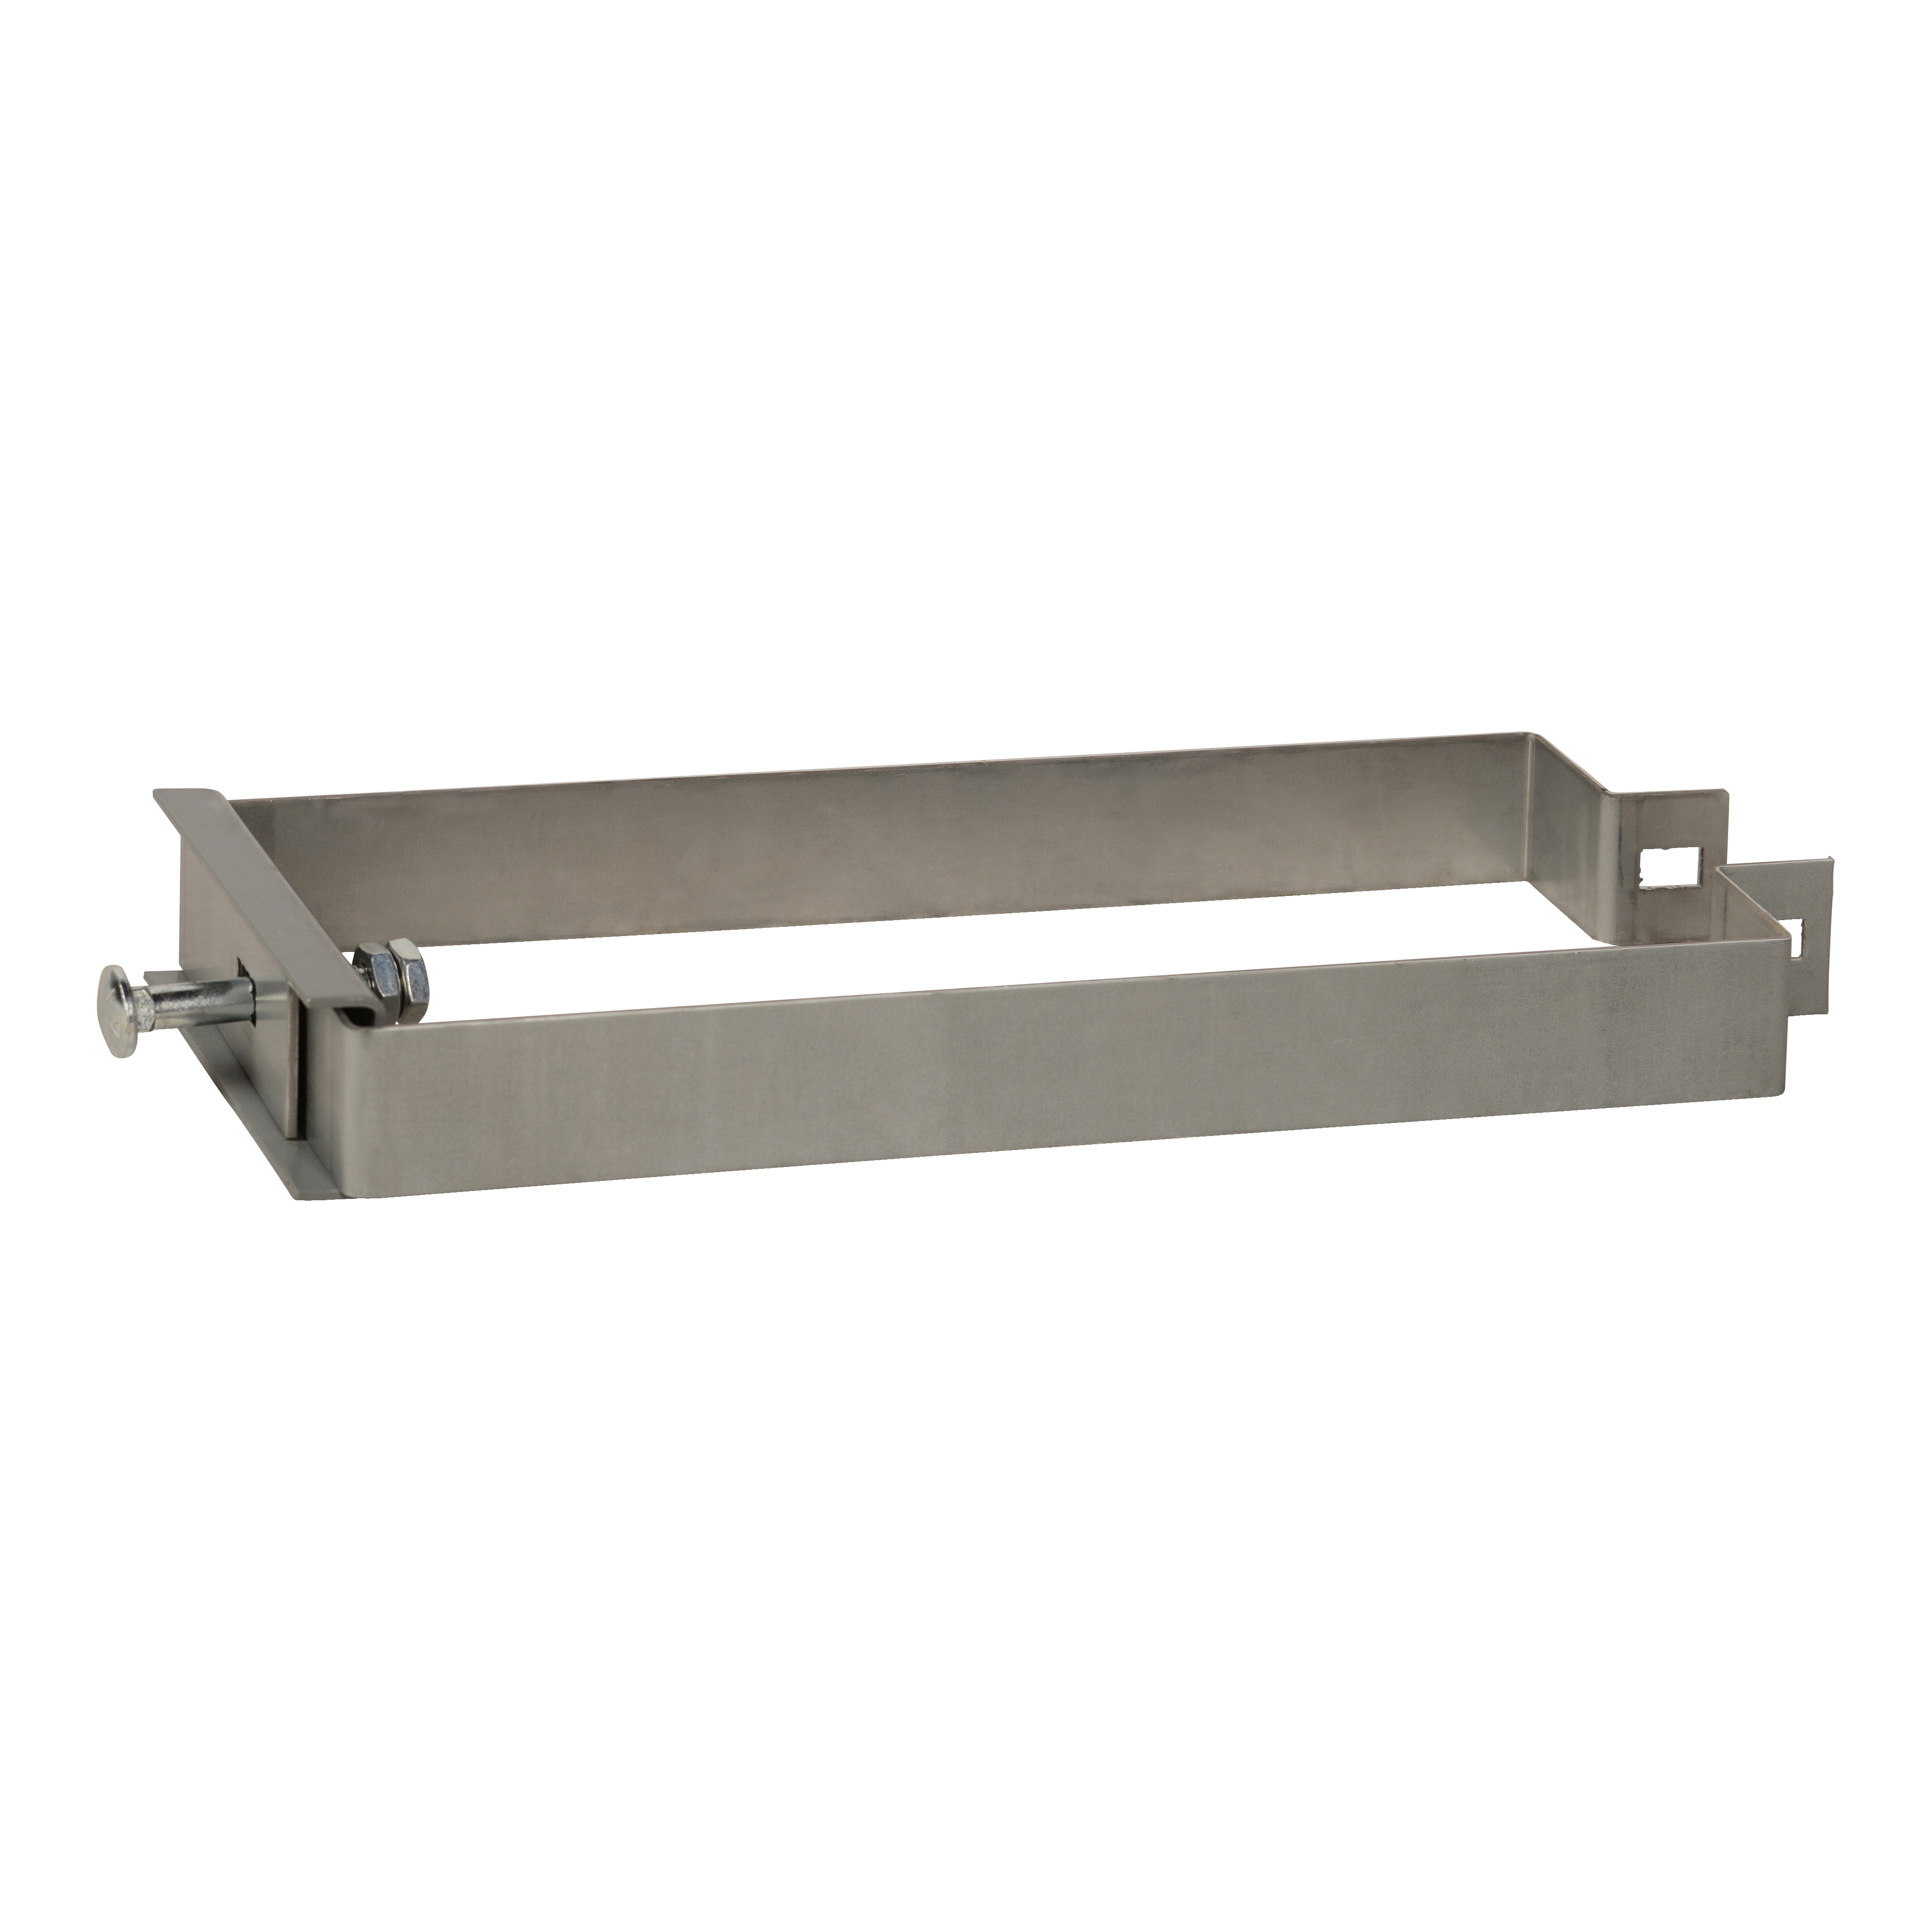 Hanger, I-Line Busway, max 1200A rated, edgewise mounting, horizontal installation, copper